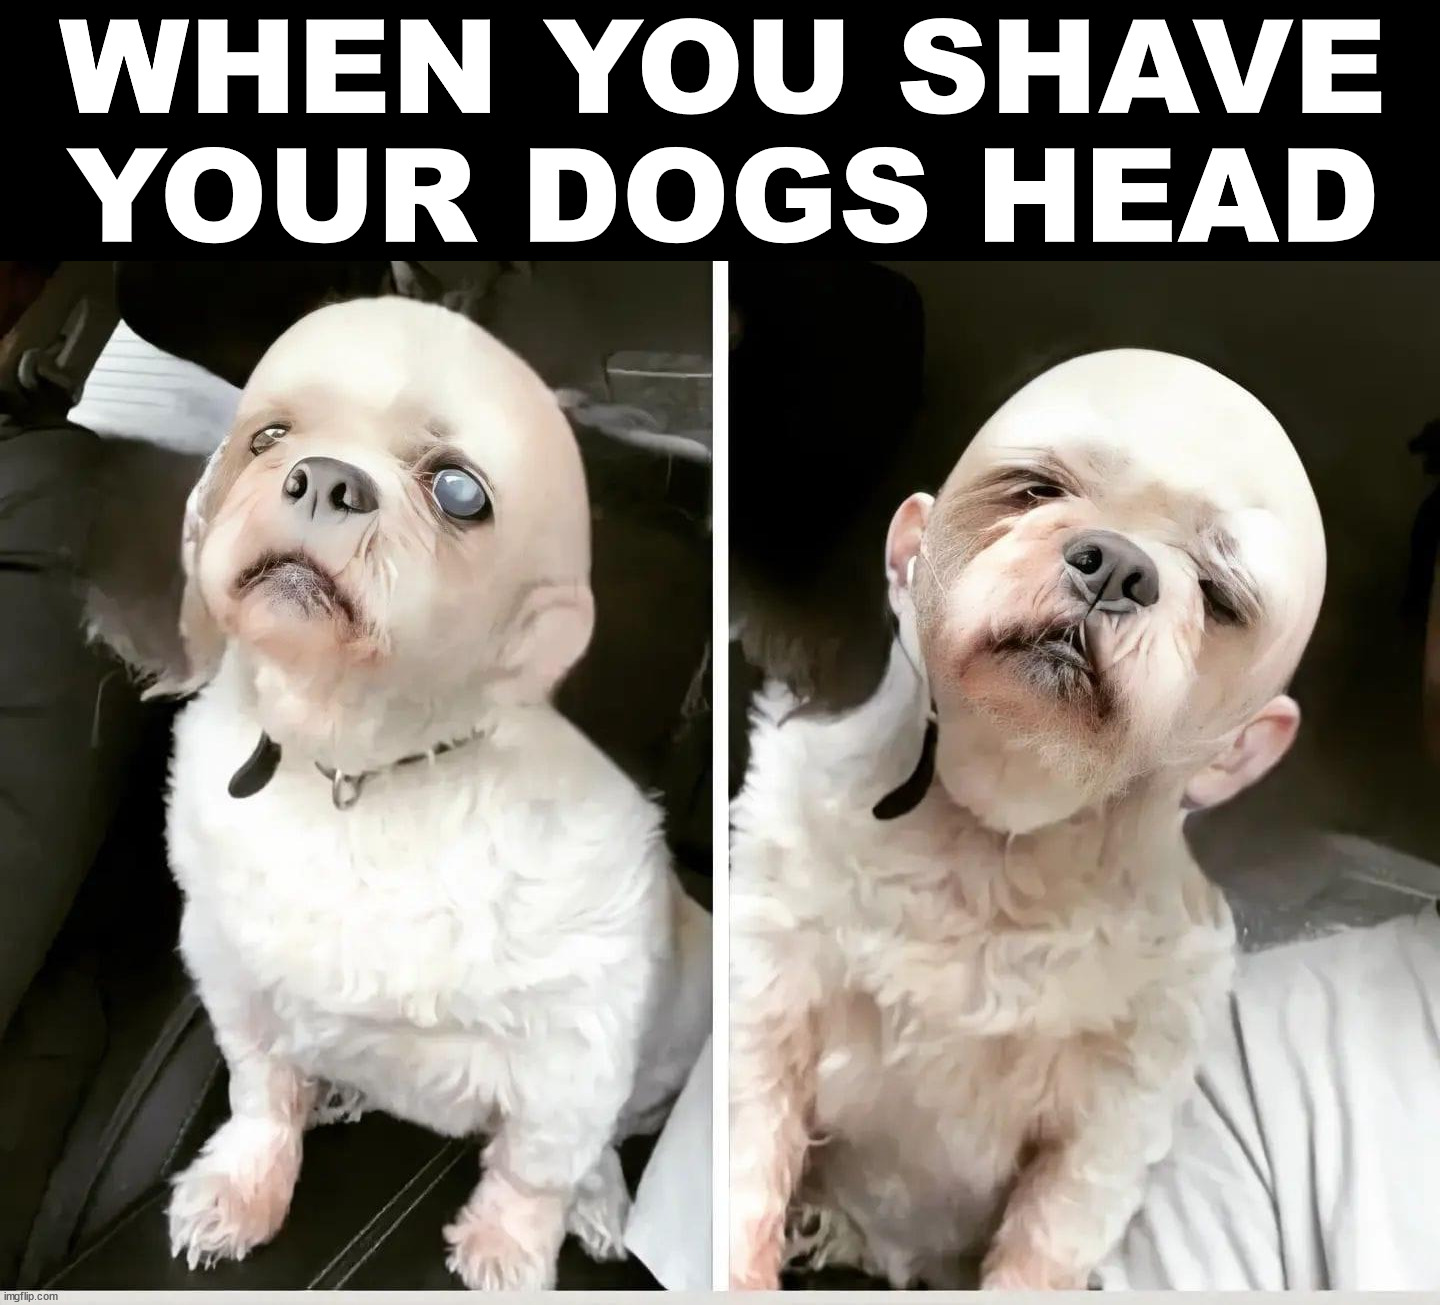 WHEN YOU SHAVE YOUR DOGS HEAD | image tagged in cursed image | made w/ Imgflip meme maker